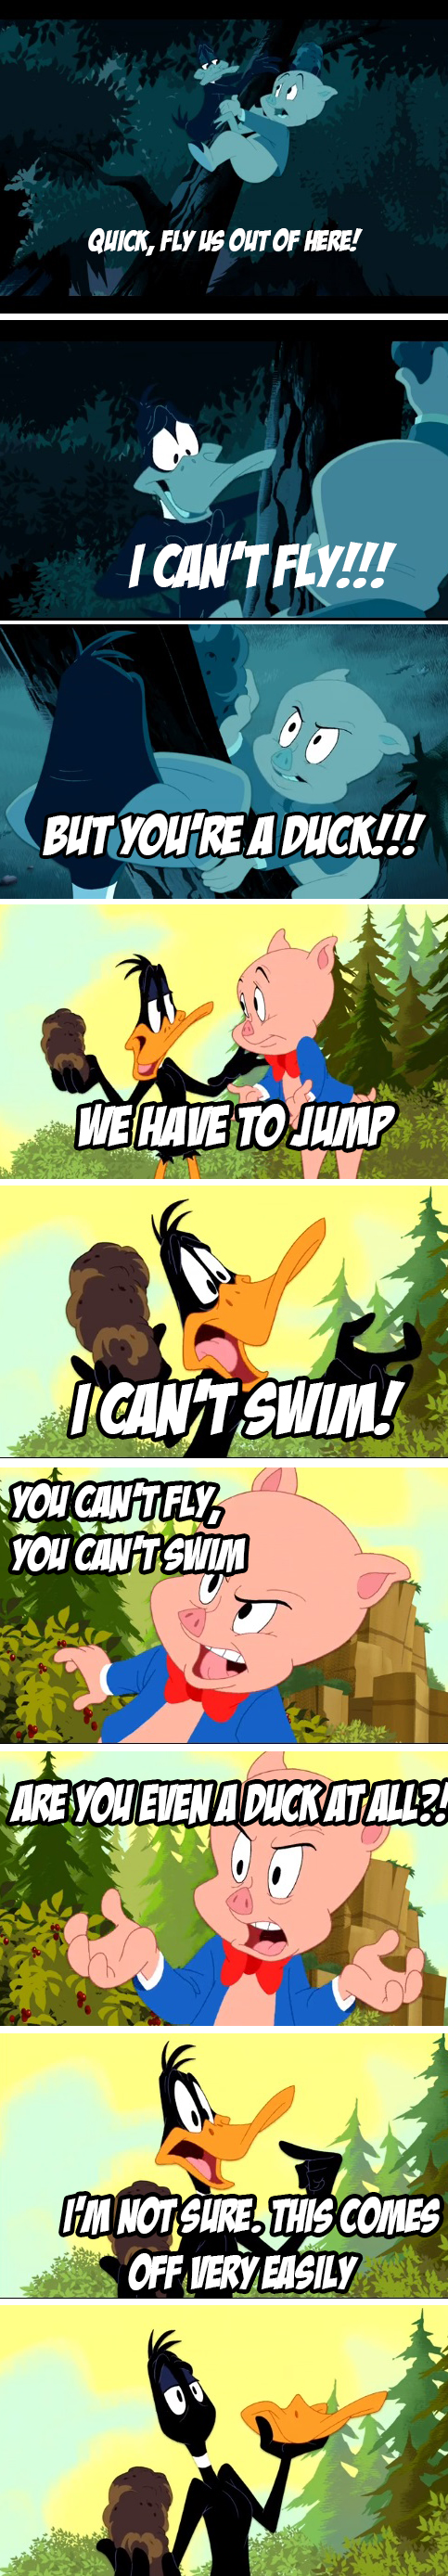 Even Daffy isnt sure anymore